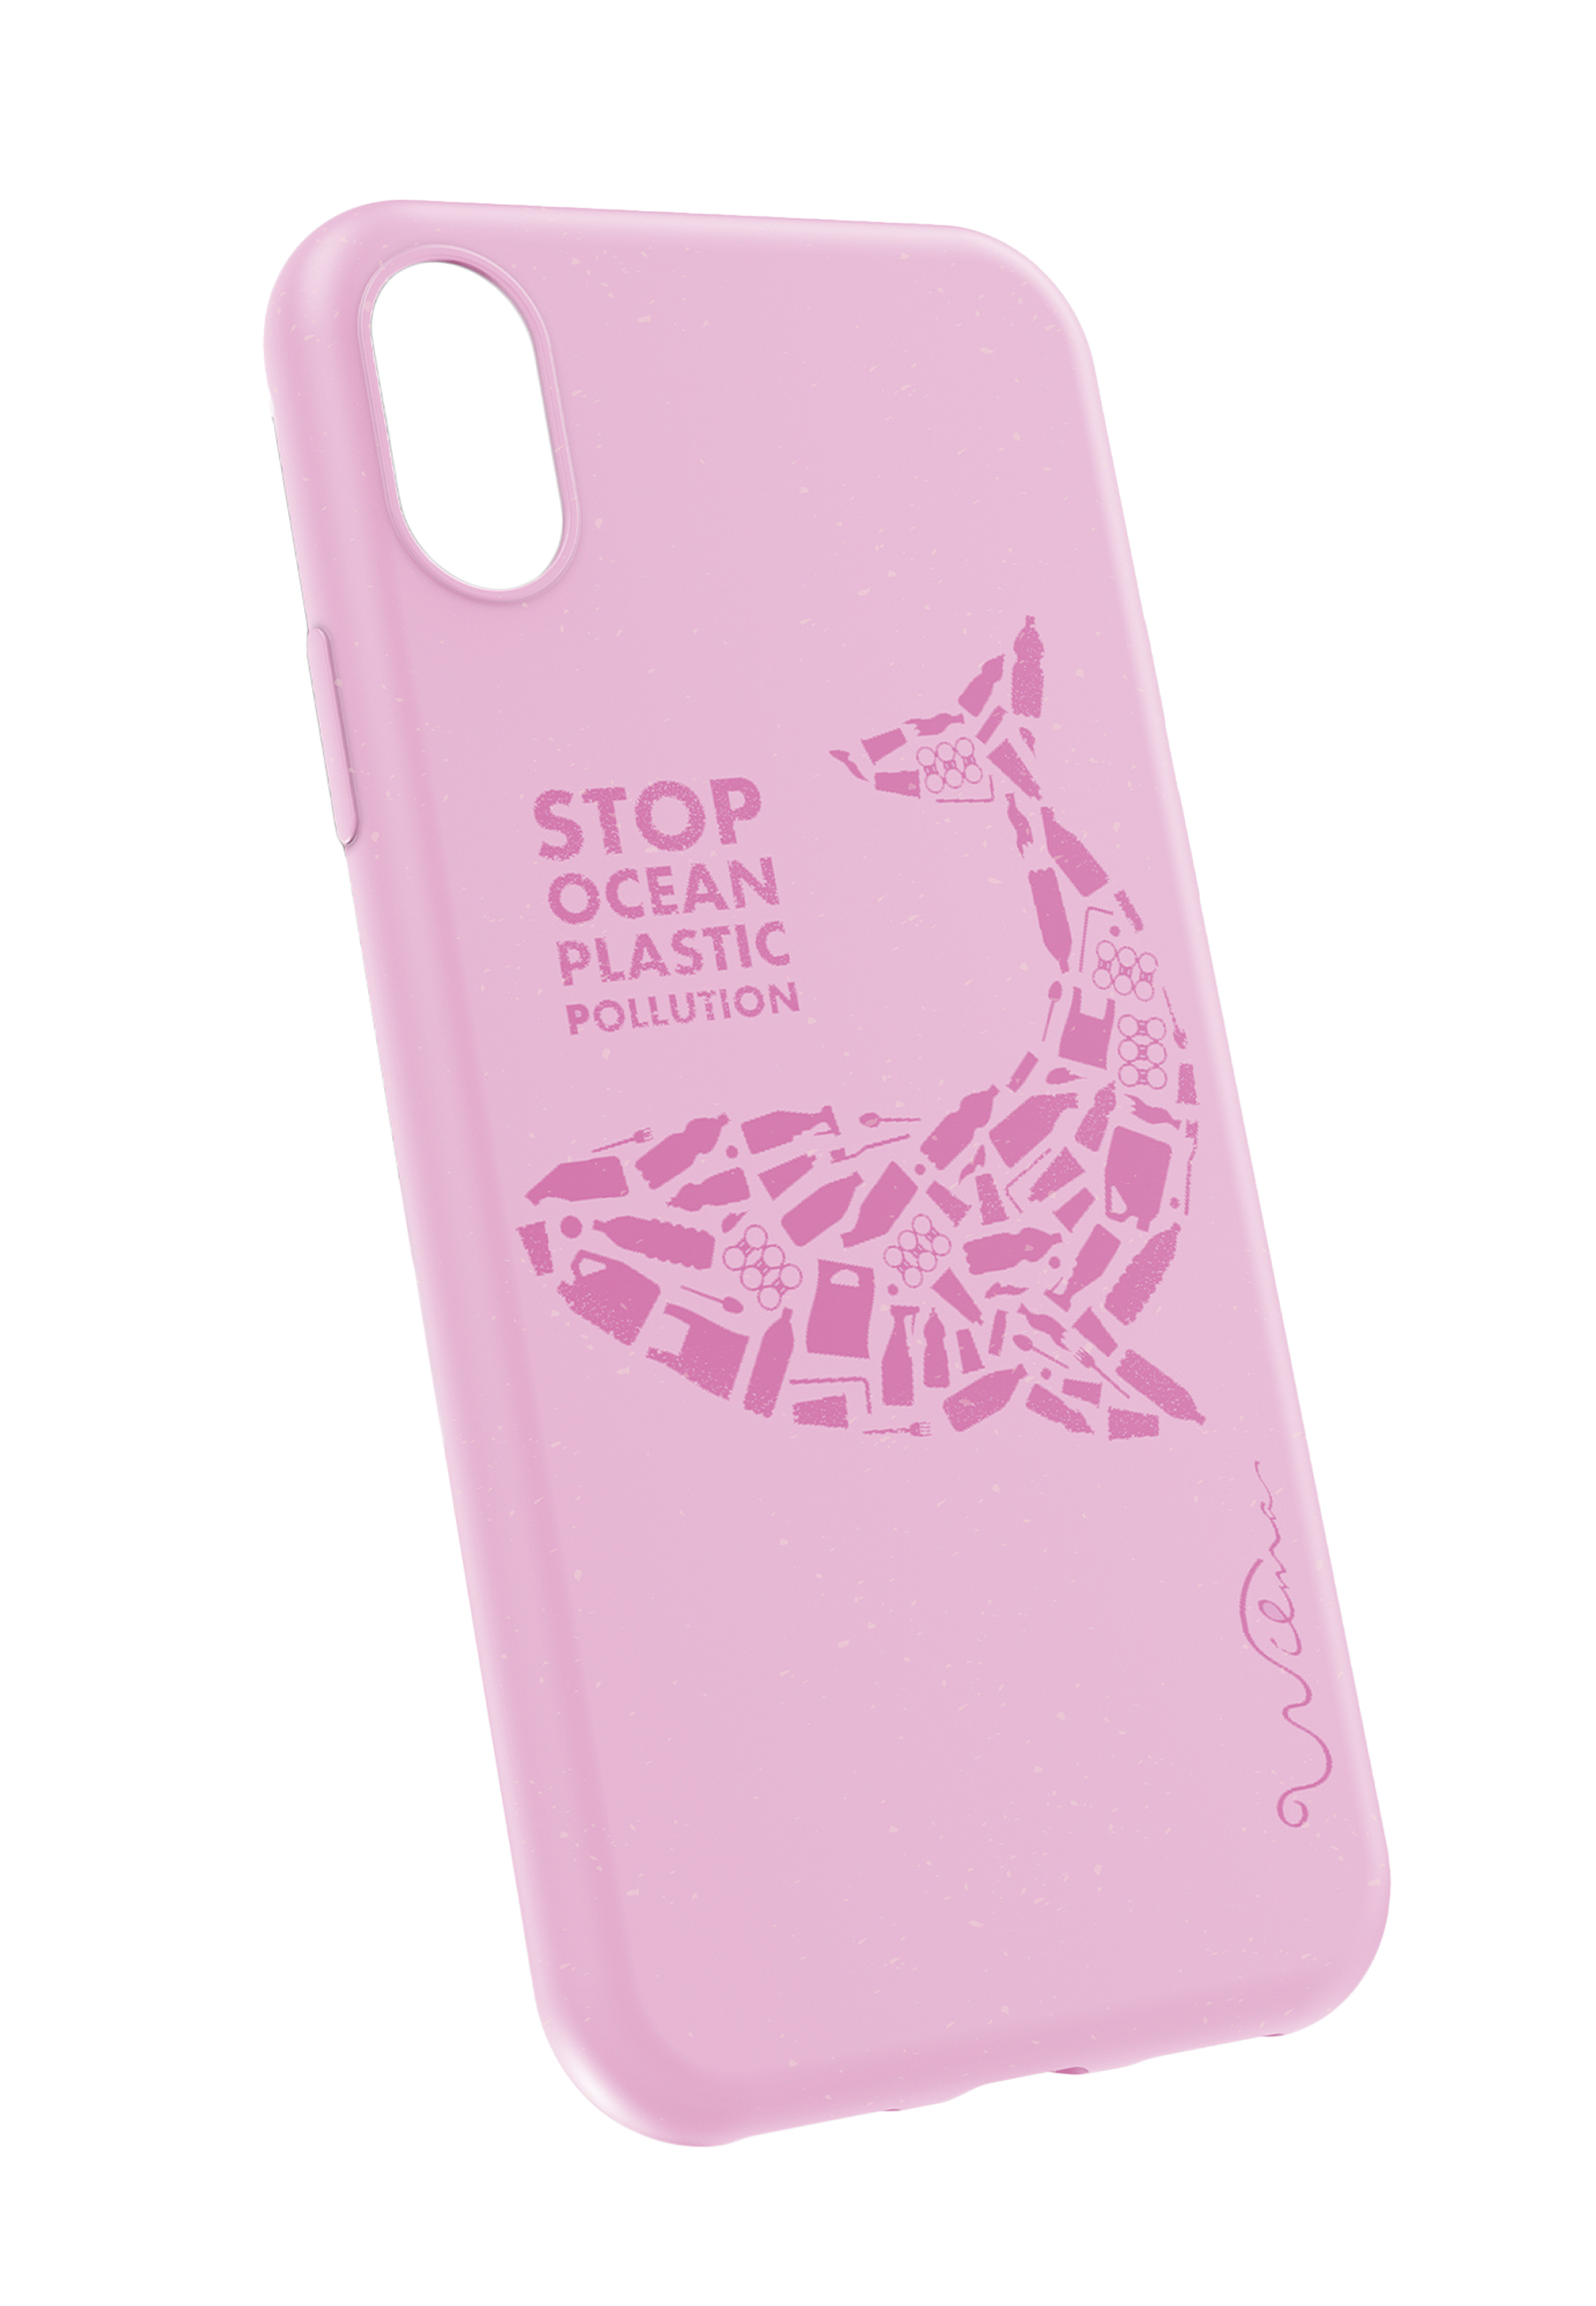 ECO FASHION BY RIPXS, Backcover, Apple, iPhone X/XS, pink WILMA